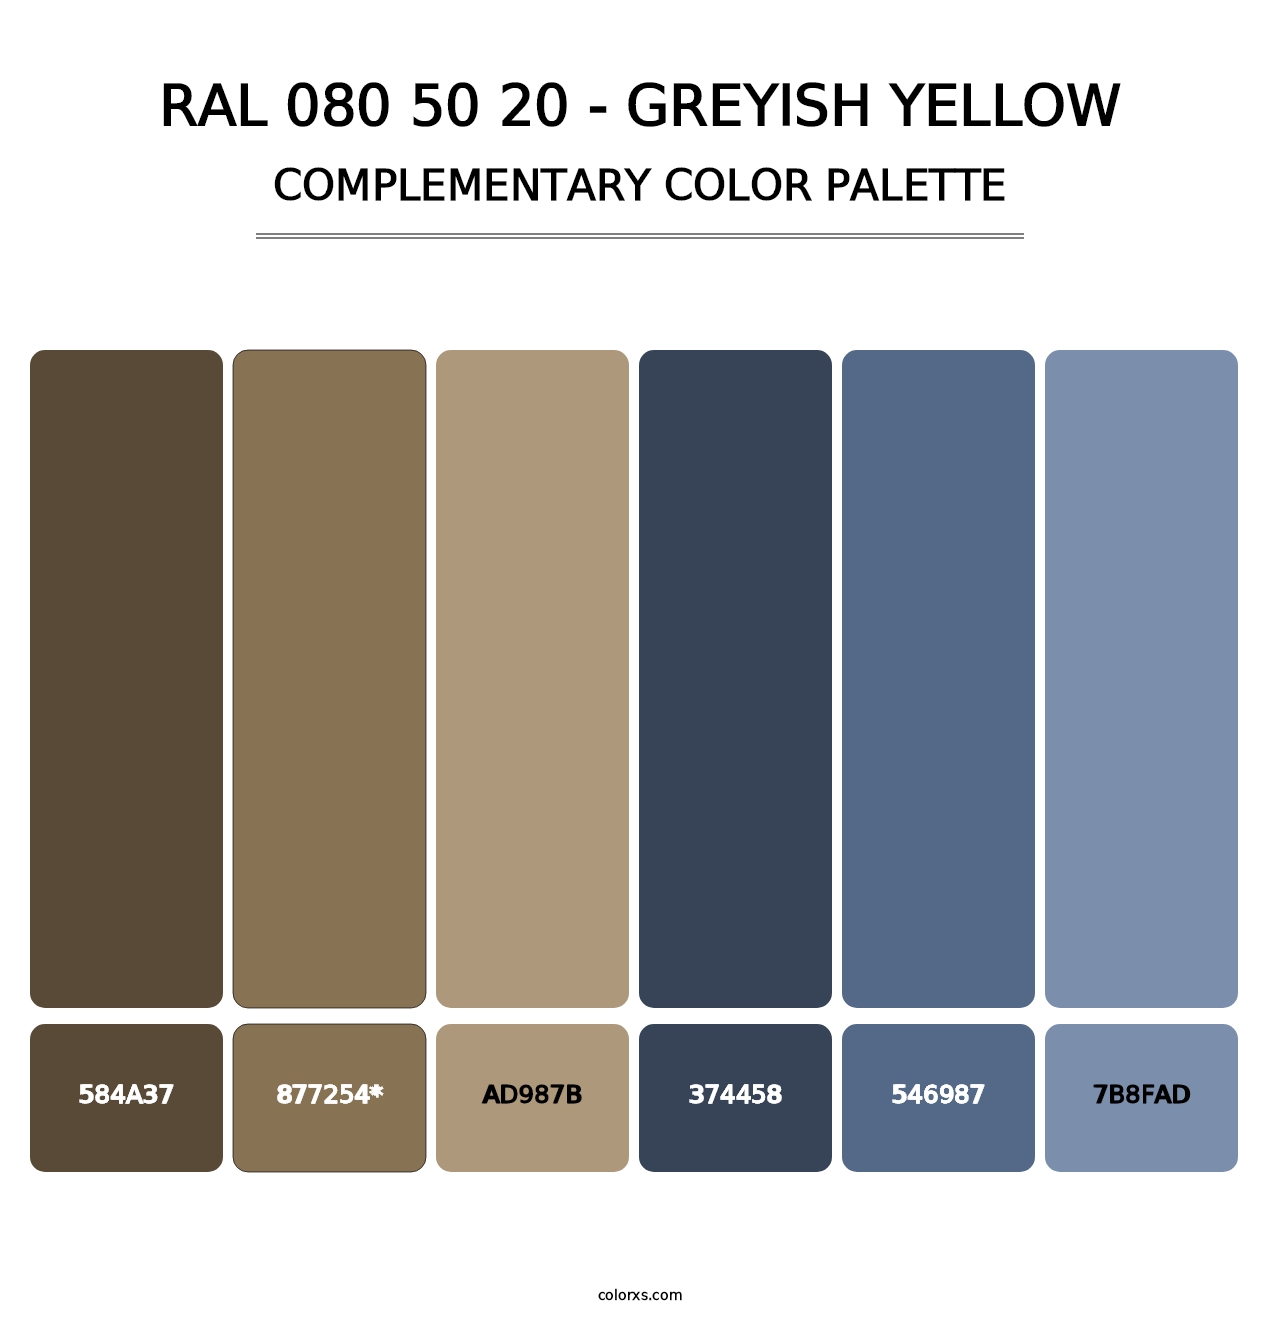 RAL 080 50 20 - Greyish Yellow - Complementary Color Palette